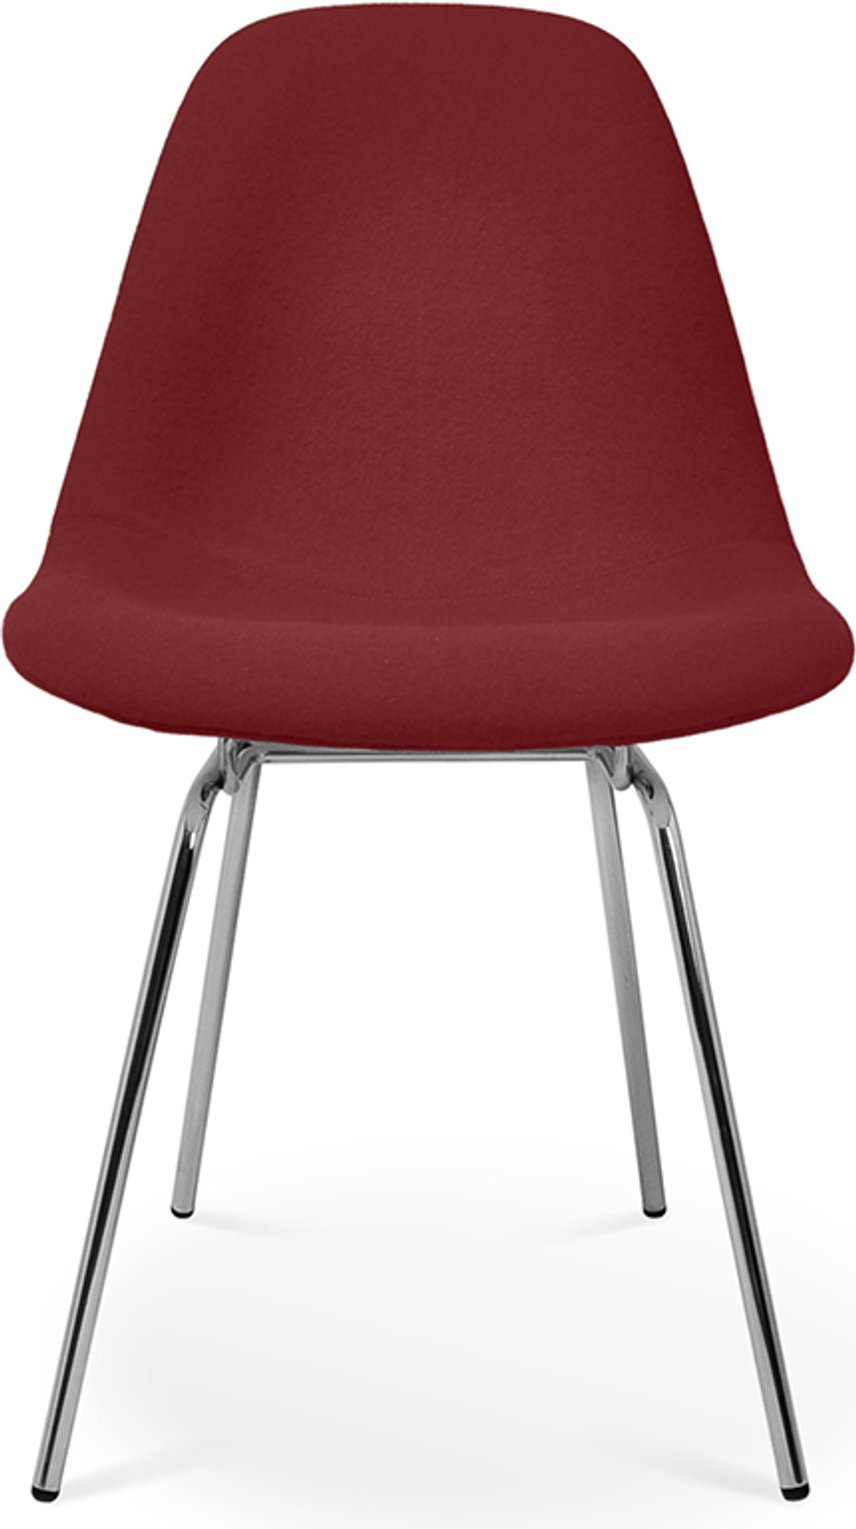 DSX Style Upholstered Dining Chair Deep Red image.